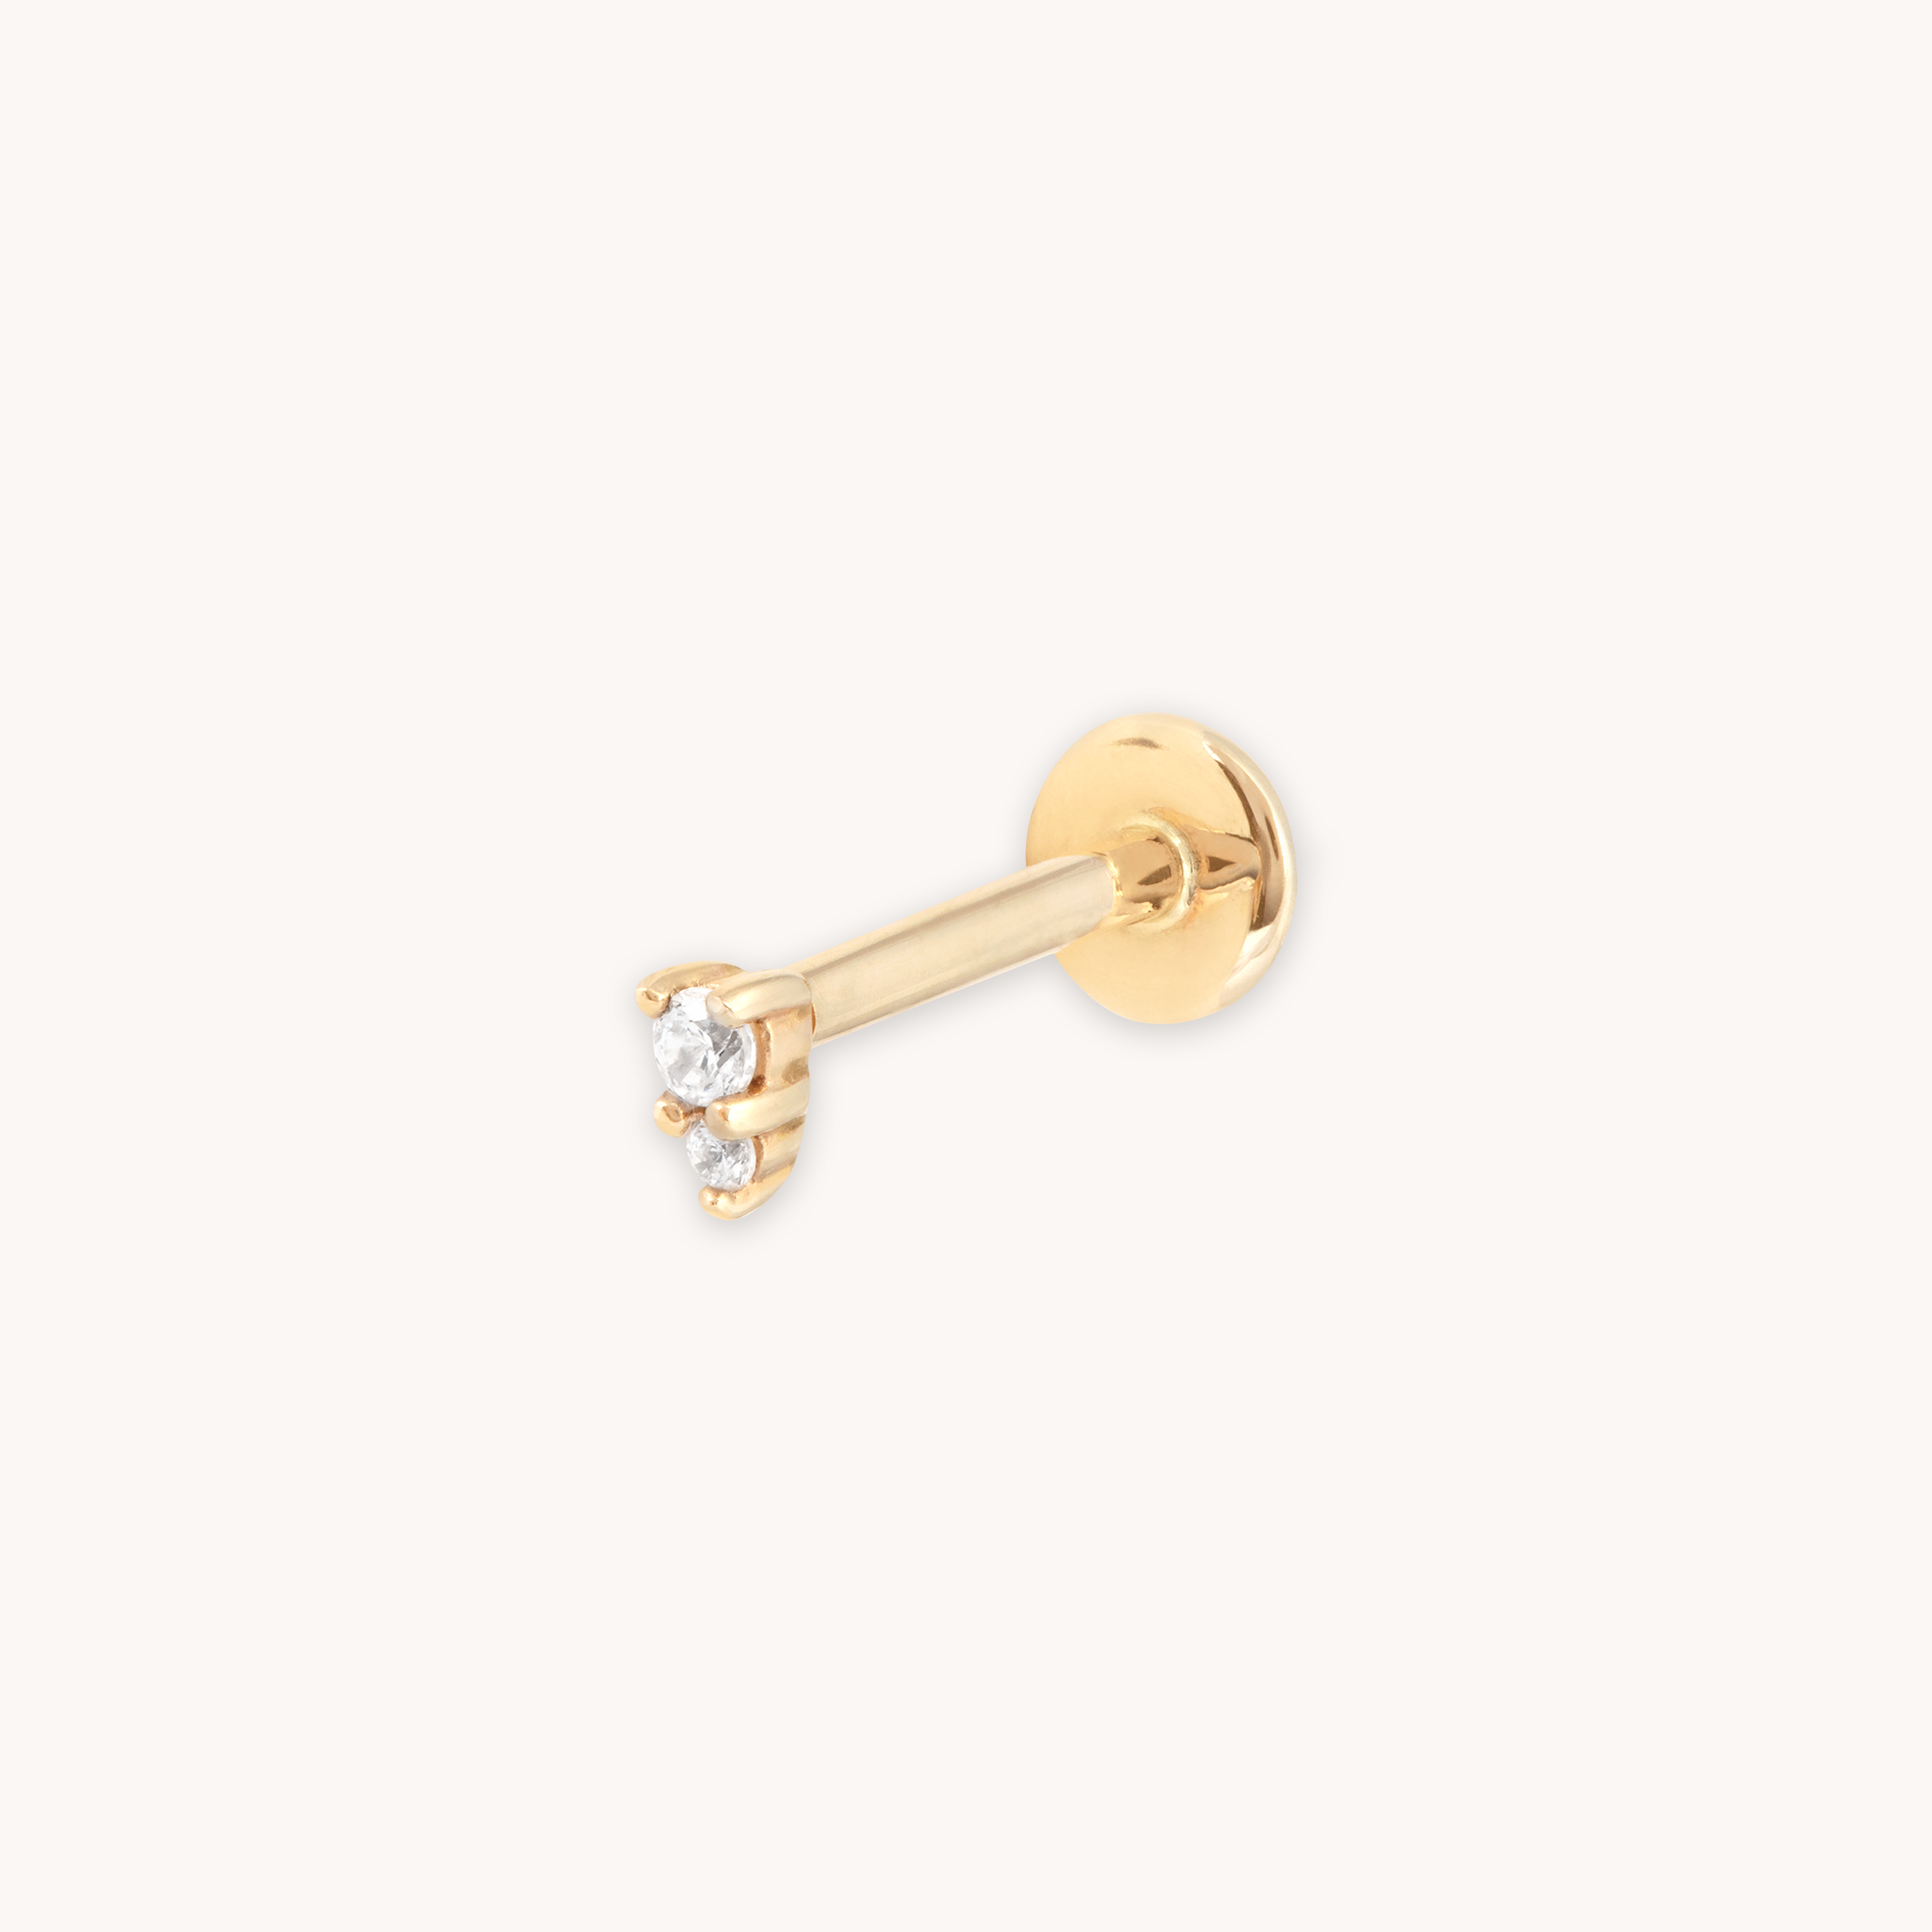 SOLID GOLD STACKED CRYSTAL PIERCING STUD CUT OUT